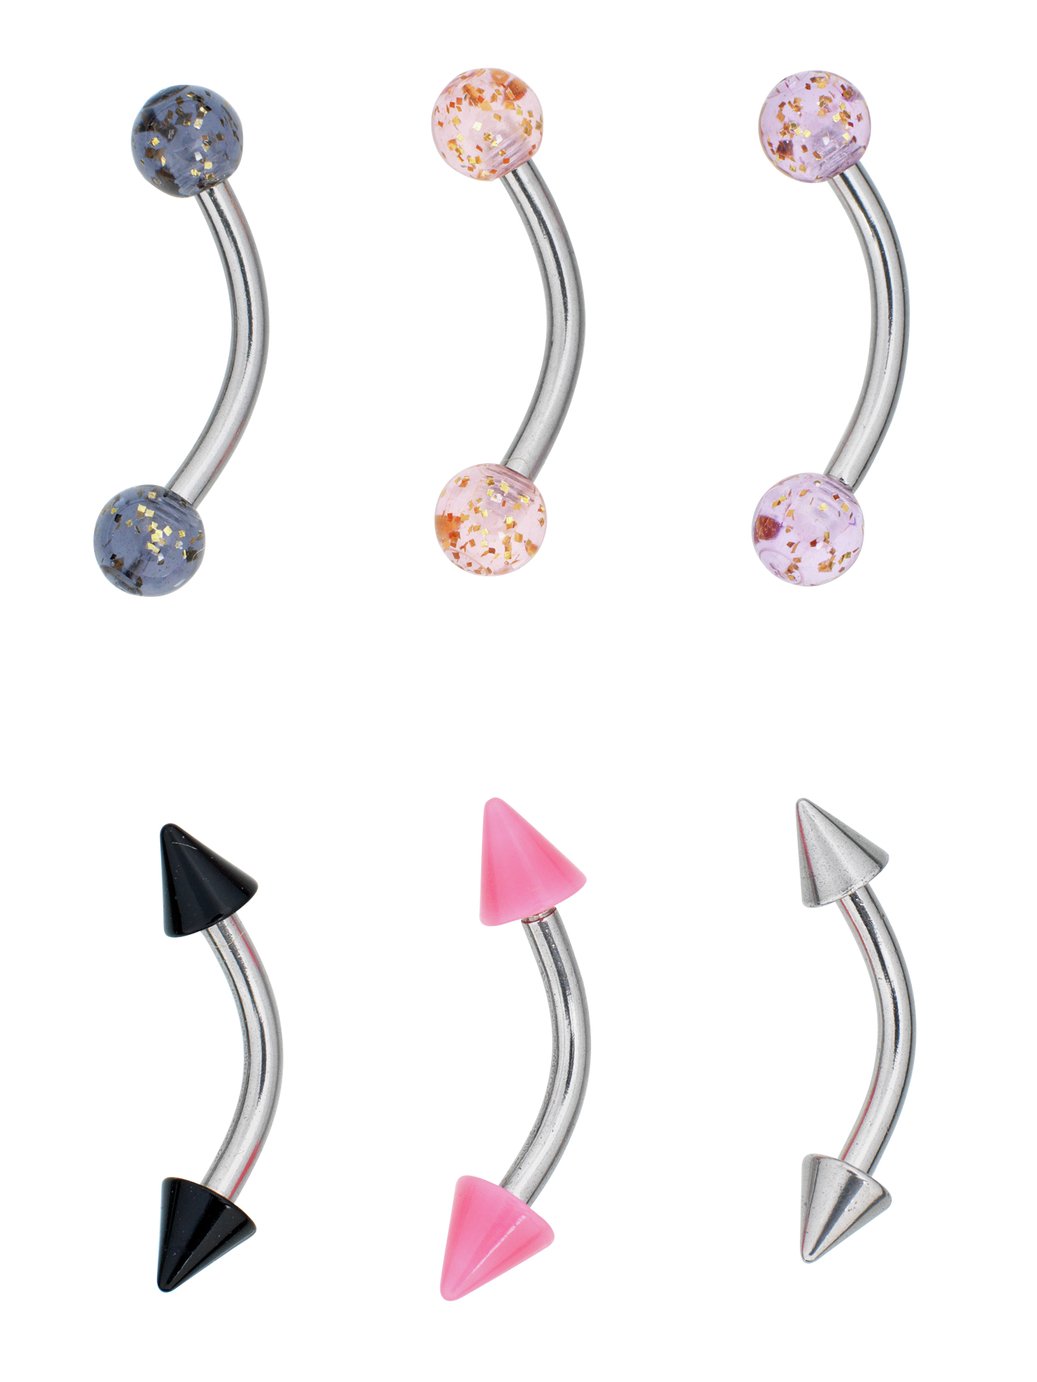 State of Mine Stainless Steel Spike Eyebrow Bars - Set of 6